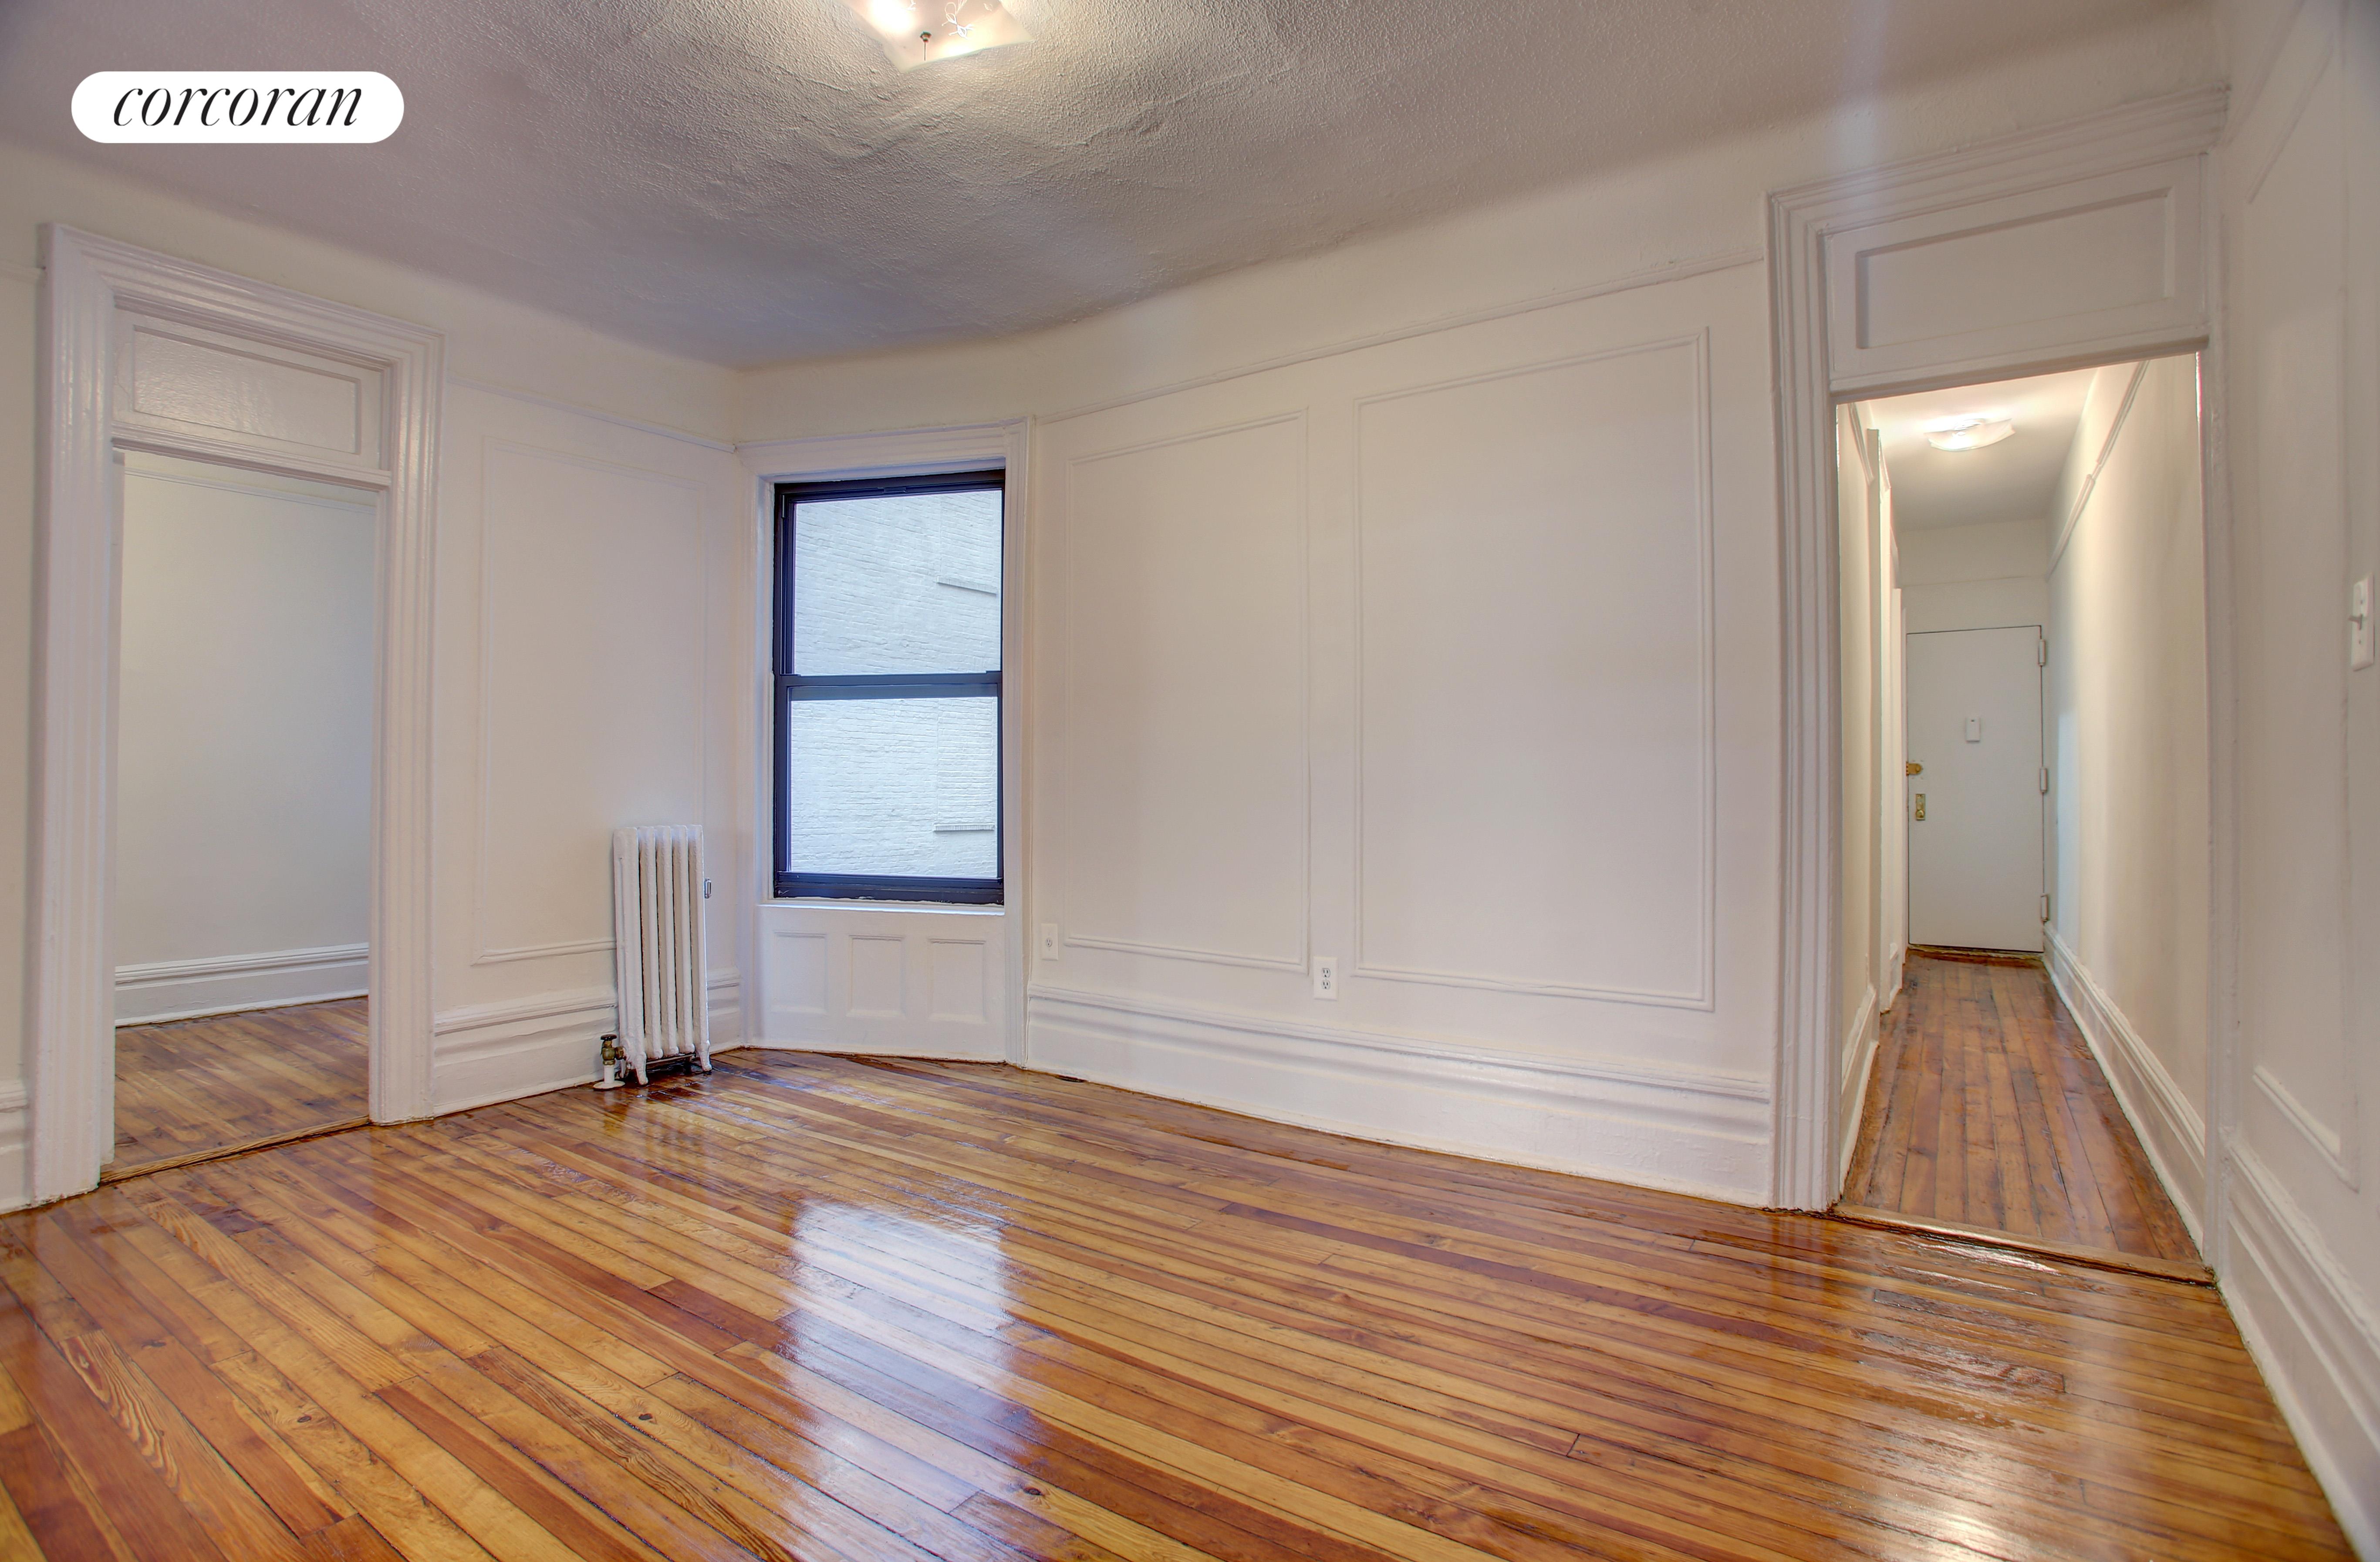 230 West 108th Street 3A, Upper West Side, Upper West Side, NYC - 3 Bedrooms  
1 Bathrooms  
5 Rooms - 